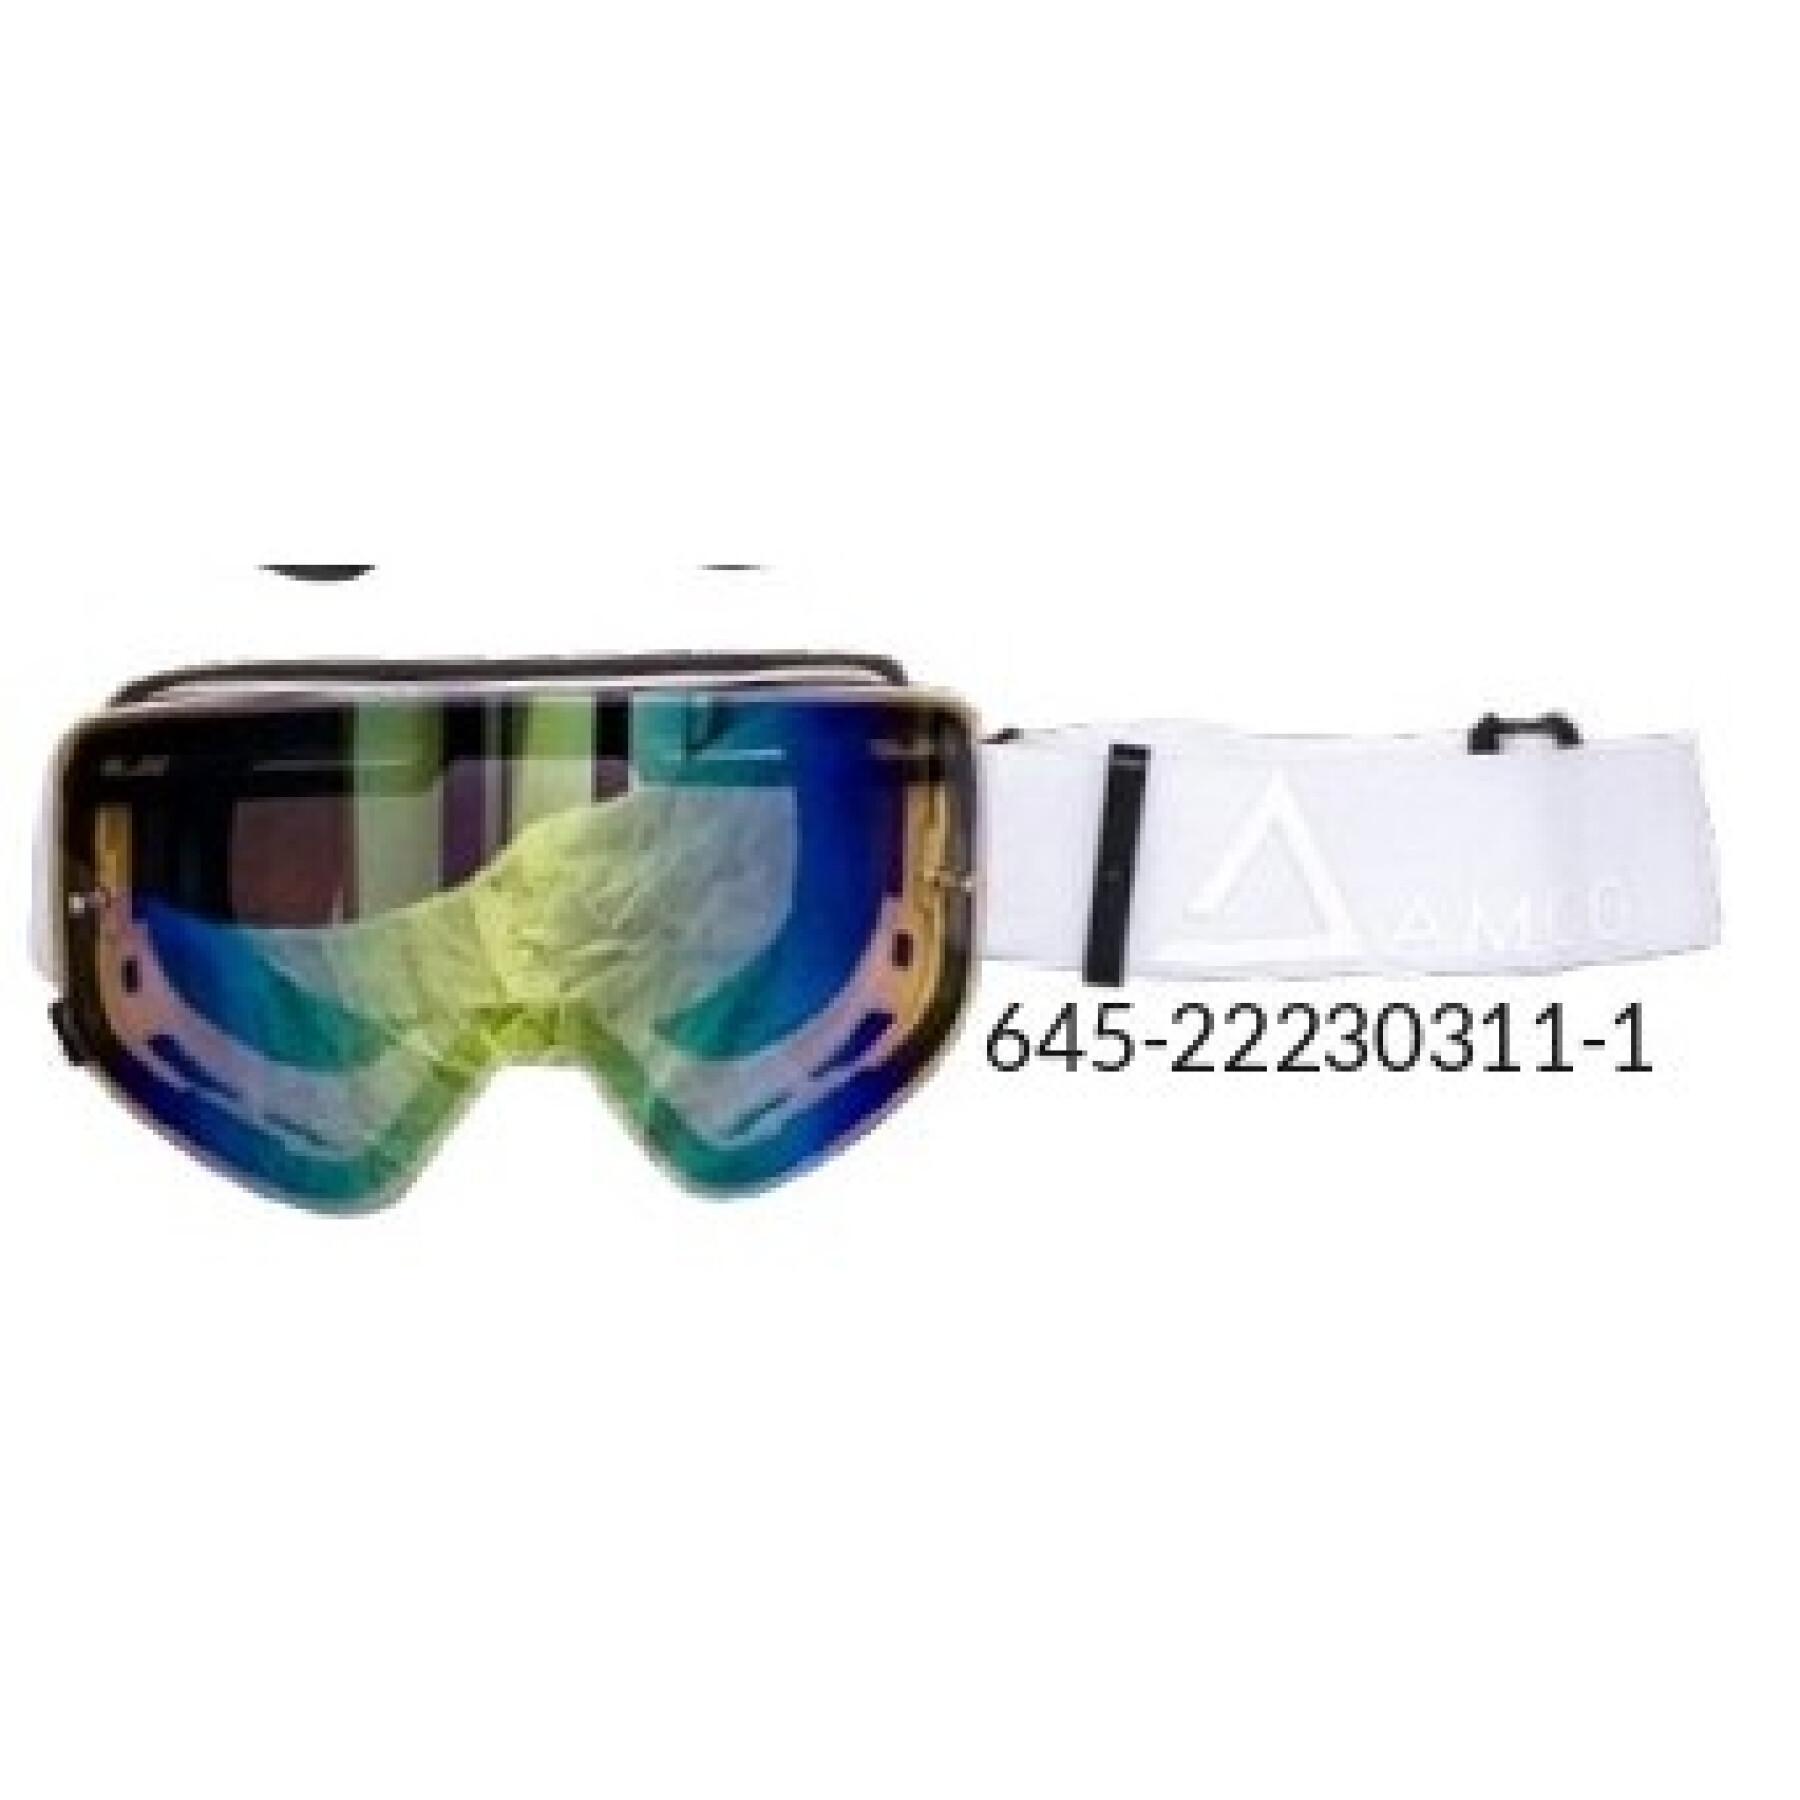 Motorcycle cross goggles with gold mirror lens Amoq Vision Magnetic